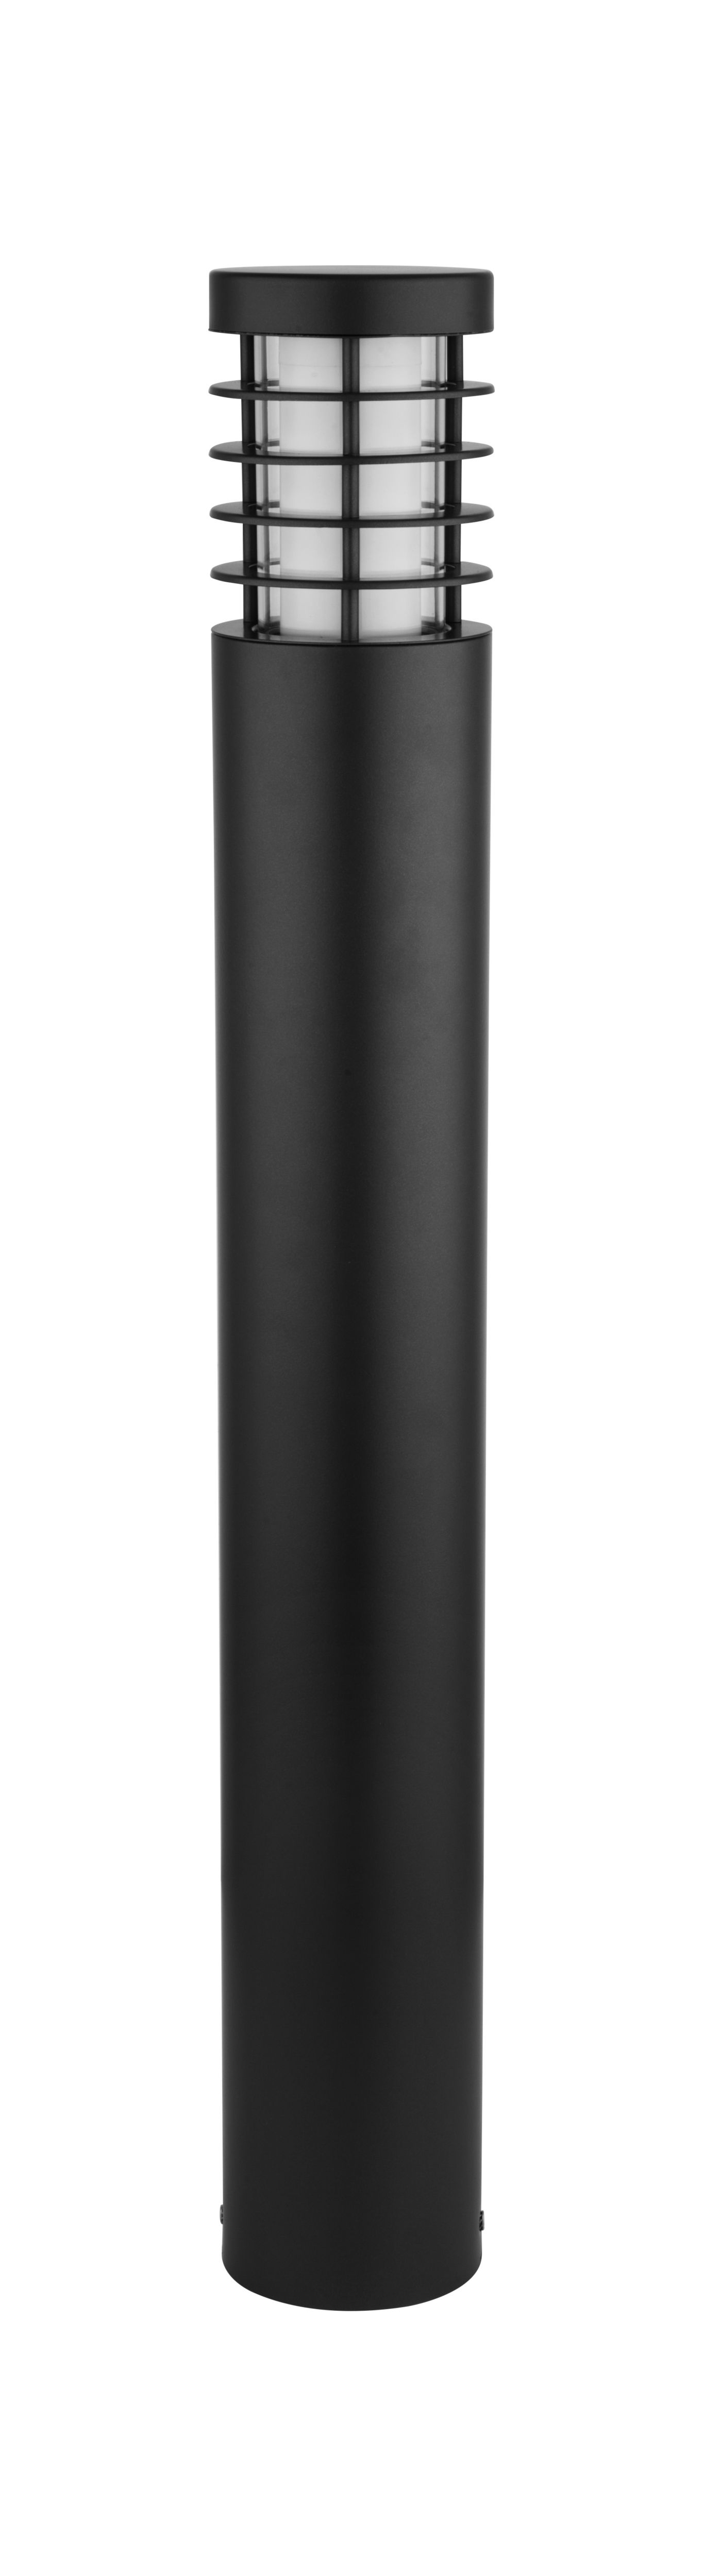 GoodHome Hampstead Black Mains-powered 1 lamp Integrated LED Outdoor Post light (H)760mm